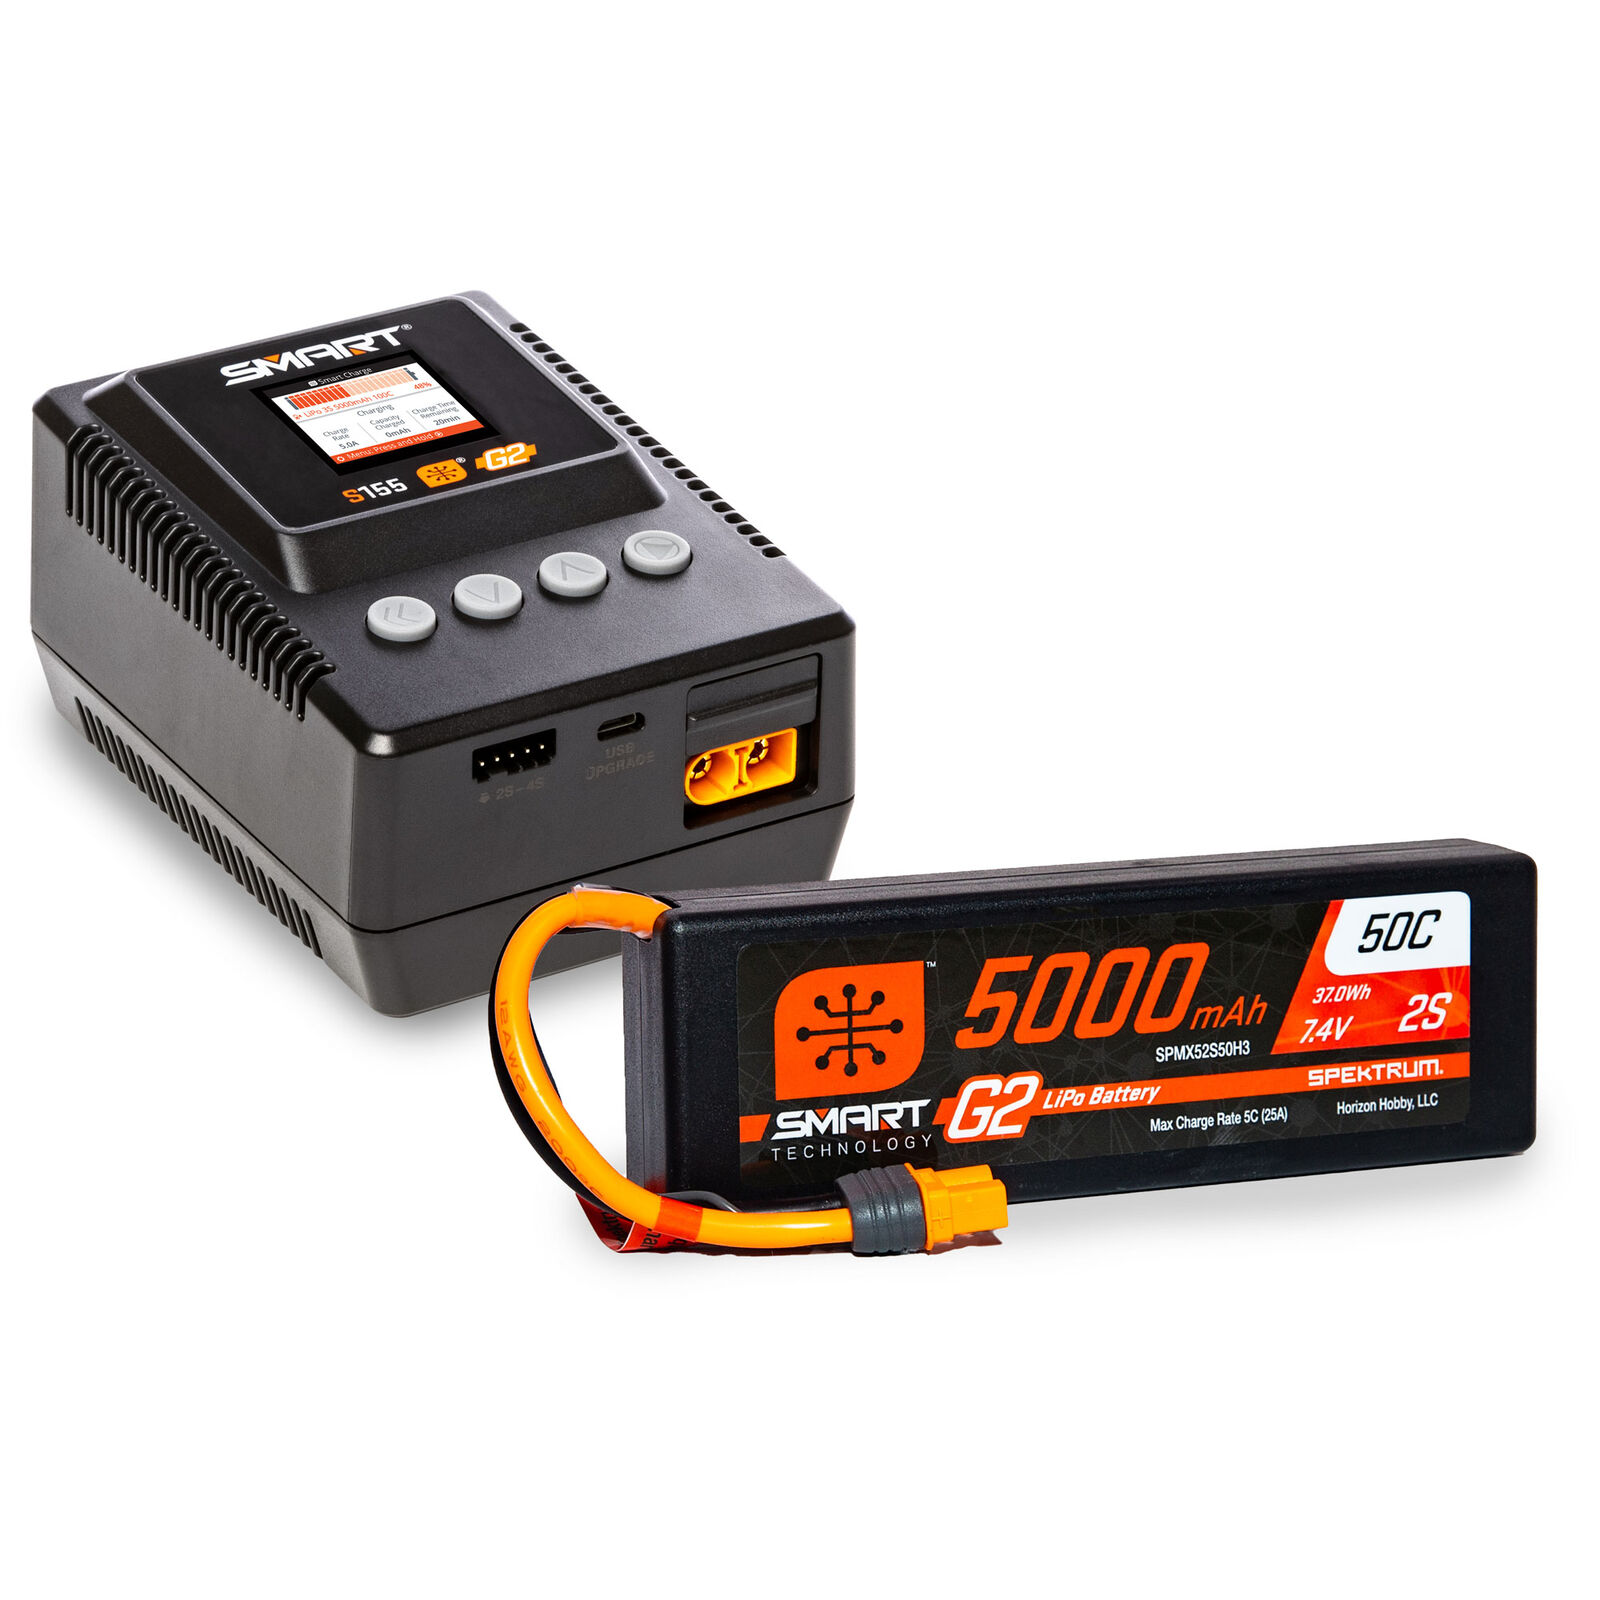 Smart Powerstage Surface Bundle: 5000mAh 2S LiPo Battery IC3 / S155 Charger